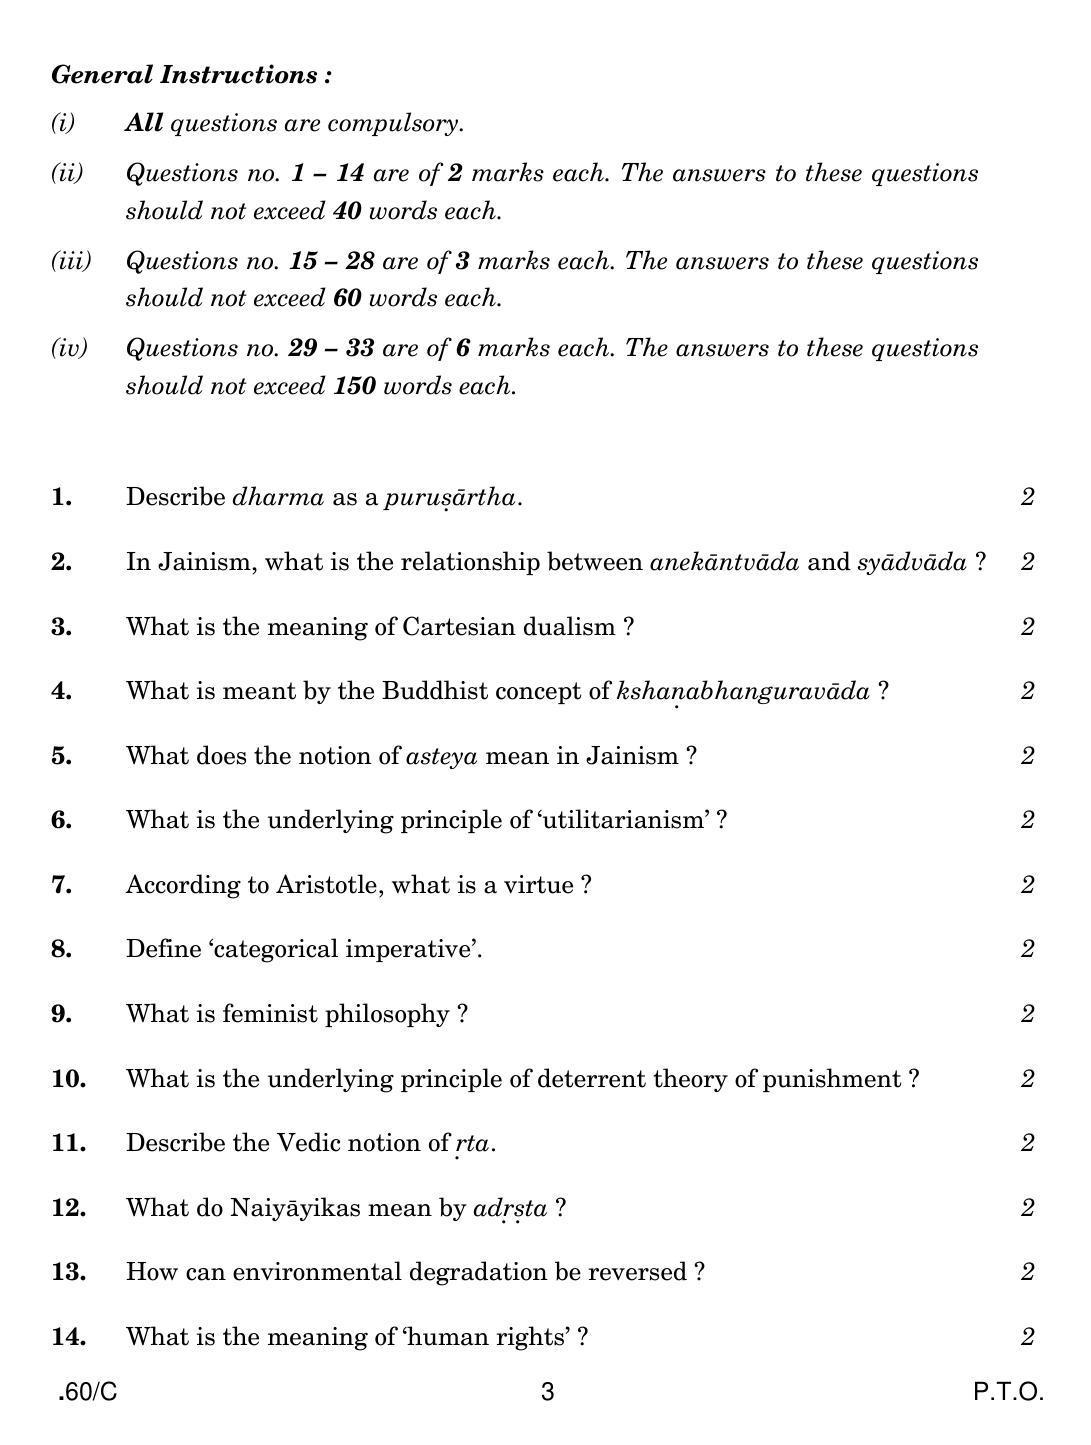 CBSE Class 12 Philosophy 2020 Compartment Question Paper - Page 3